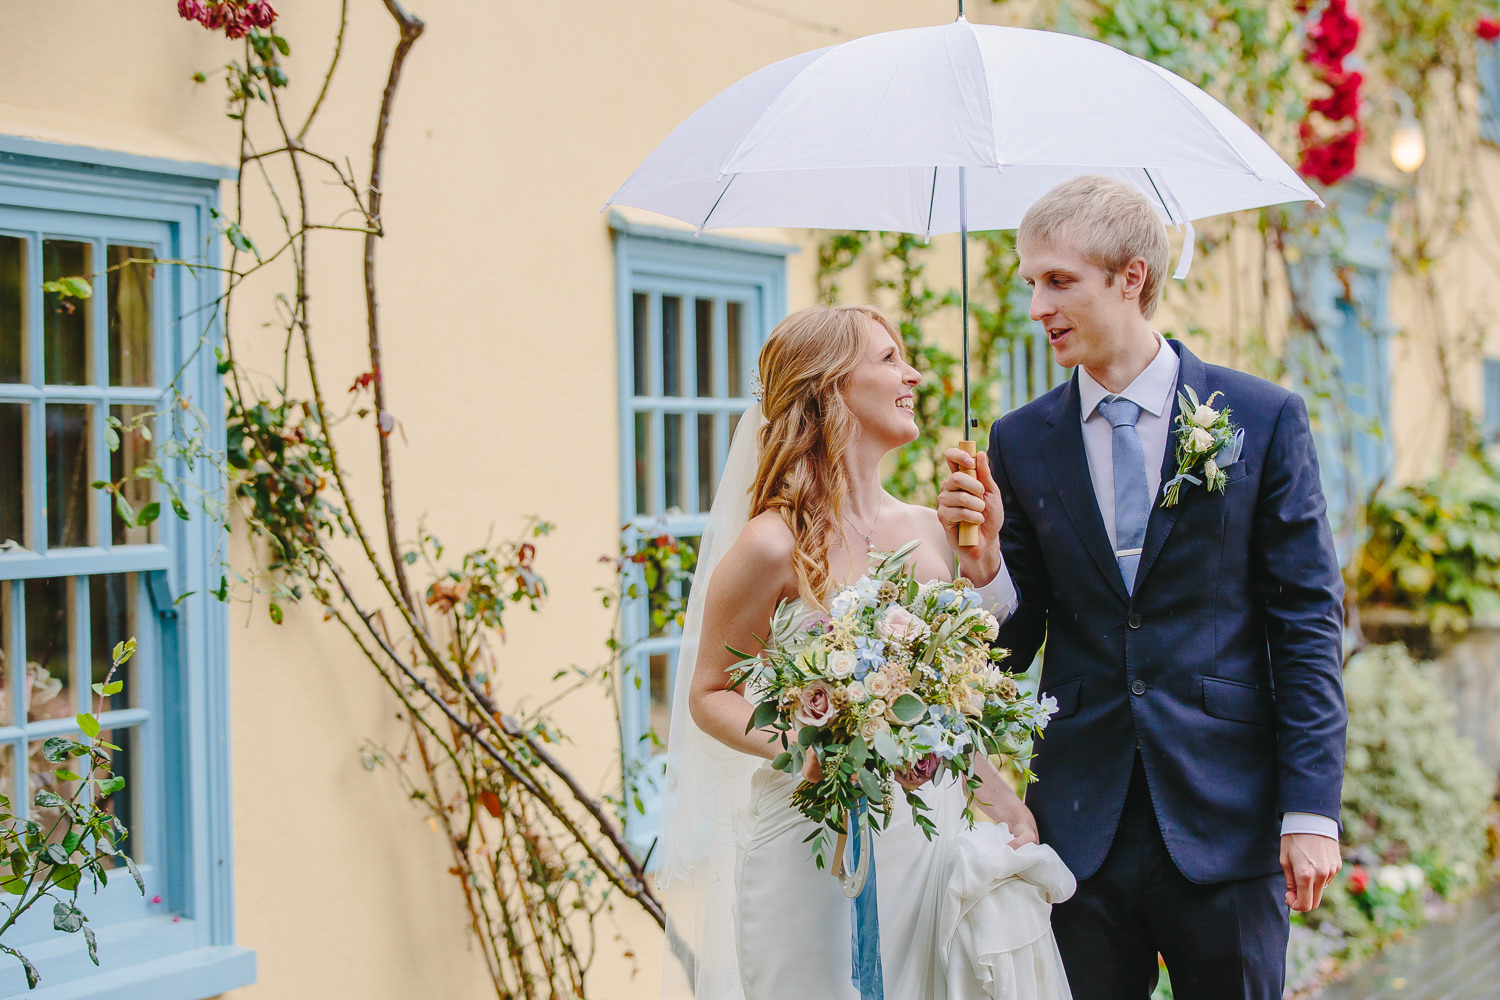 Bride and groom, white umbrella in front of yellow house with blue windows